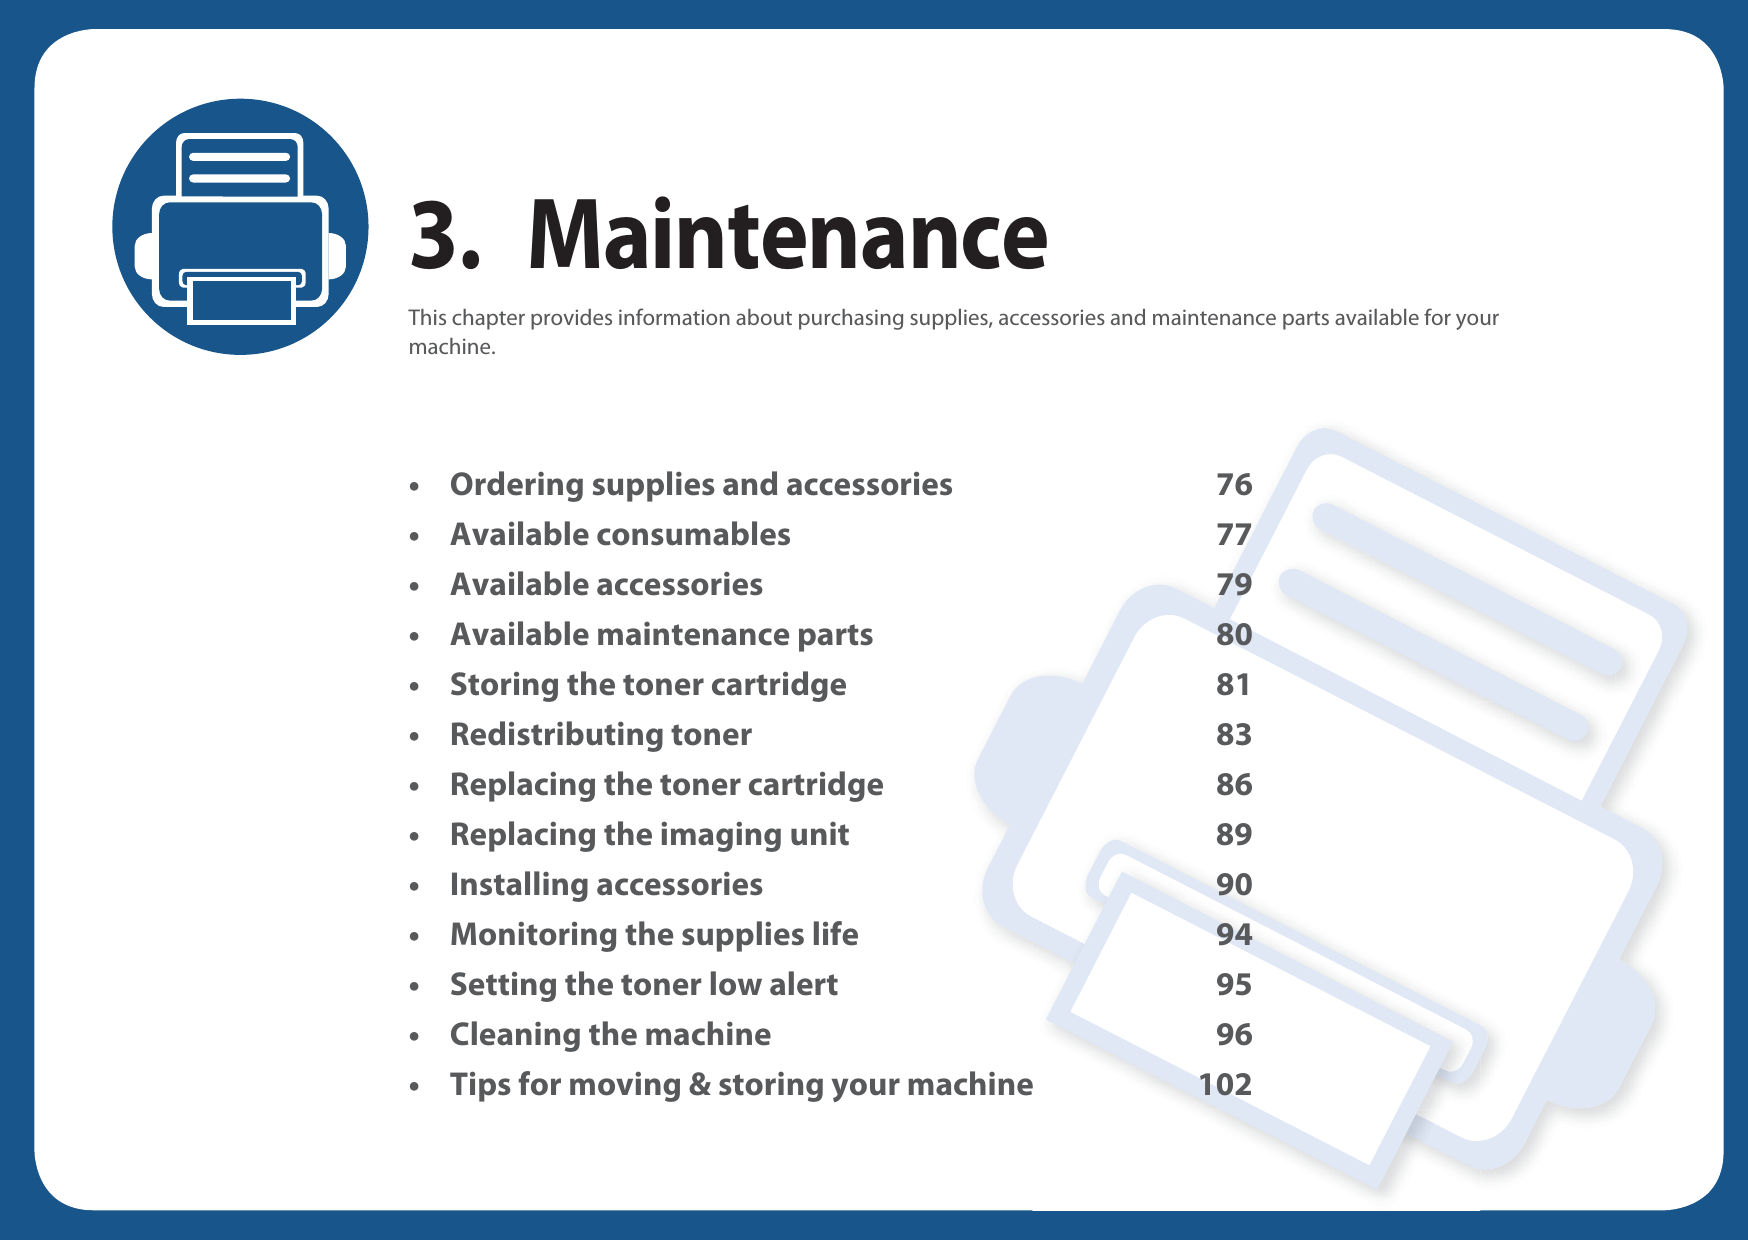 3. MaintenanceThis chapter provides information about purchasing supplies, accessories and maintenance parts available for your machine.• Ordering supplies and accessories 76• Available consumables 77• Available accessories 79• Available maintenance parts 80• Storing the toner cartridge 81• Redistributing toner 83• Replacing the toner cartridge 86• Replacing the imaging unit 89• Installing accessories 90• Monitoring the supplies life 94• Setting the toner low alert 95• Cleaning the machine 96• Tips for moving &amp; storing your machine 102